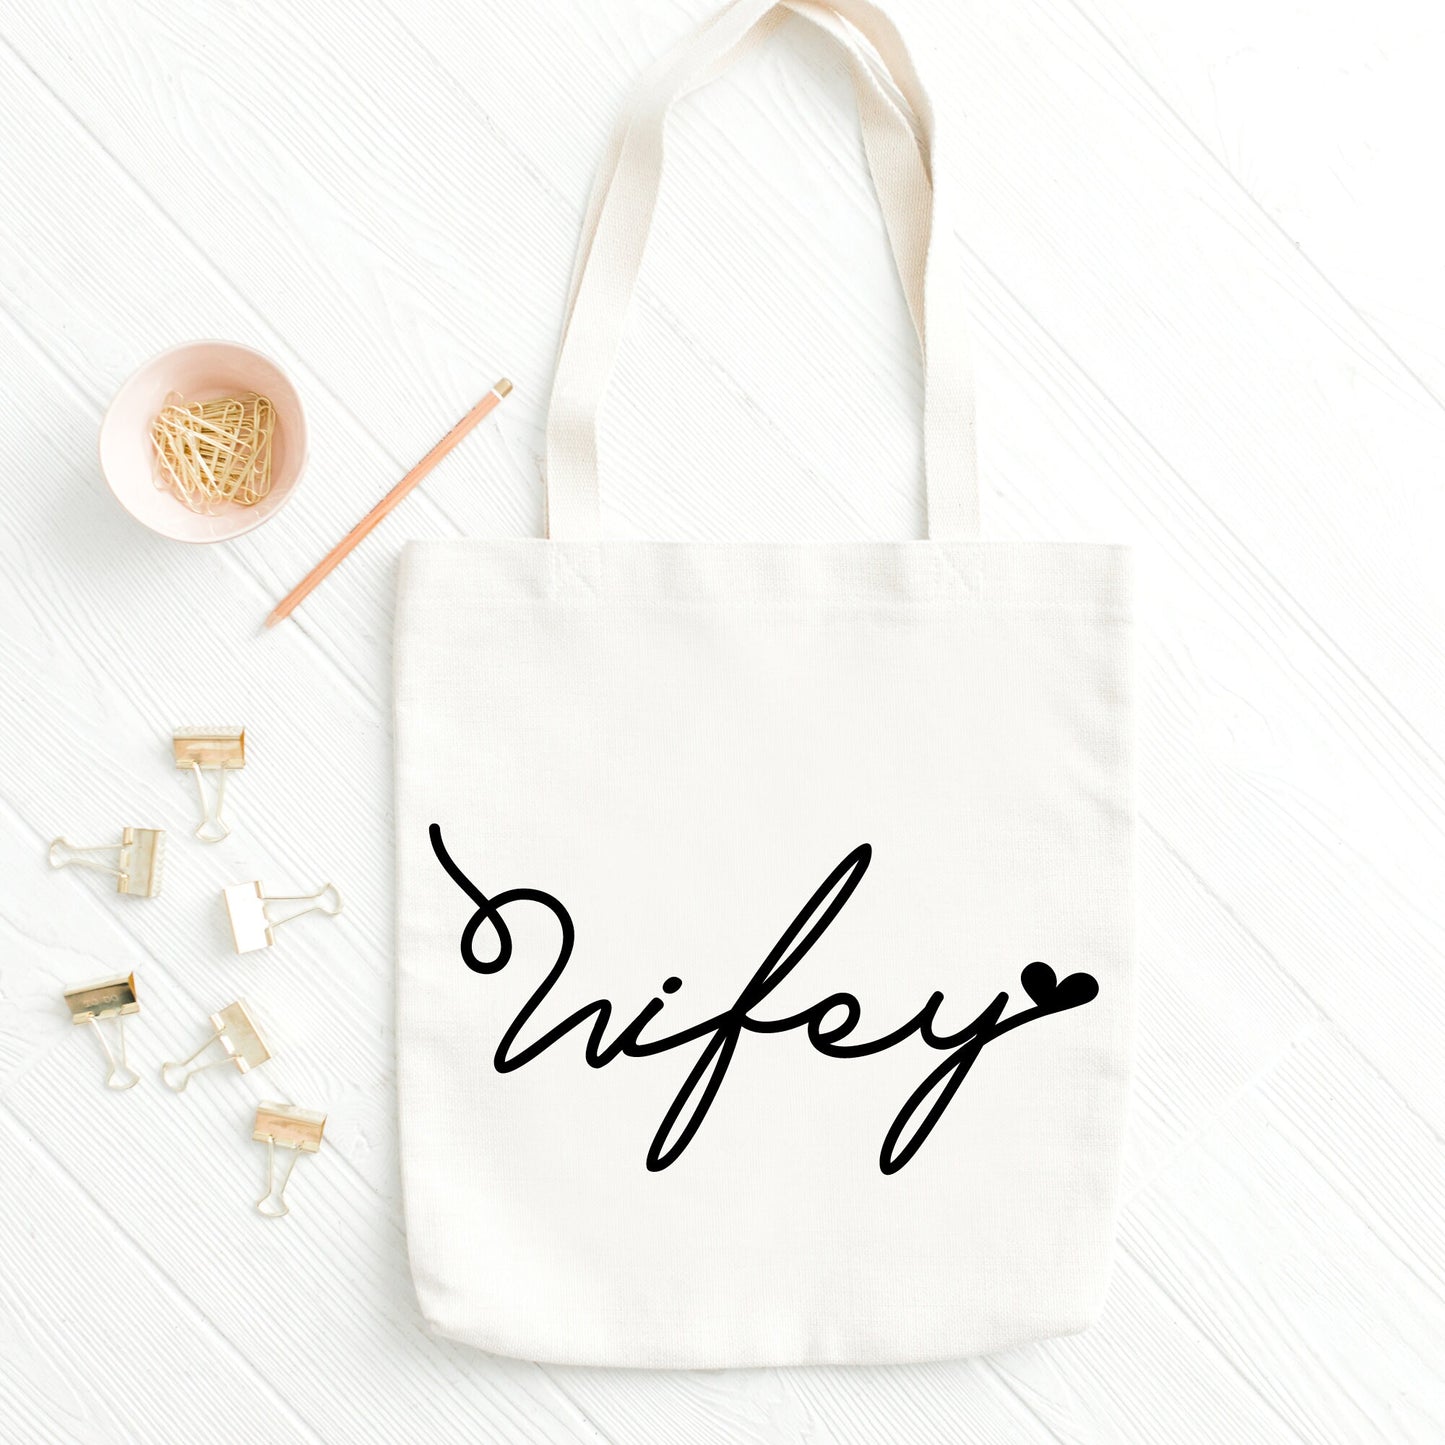 Wifey Tote Bag, Wedding & Hen Party Tote Bags, Wifey for Lifey Bag, Bride to Be Gifts, Bachelorette Bags